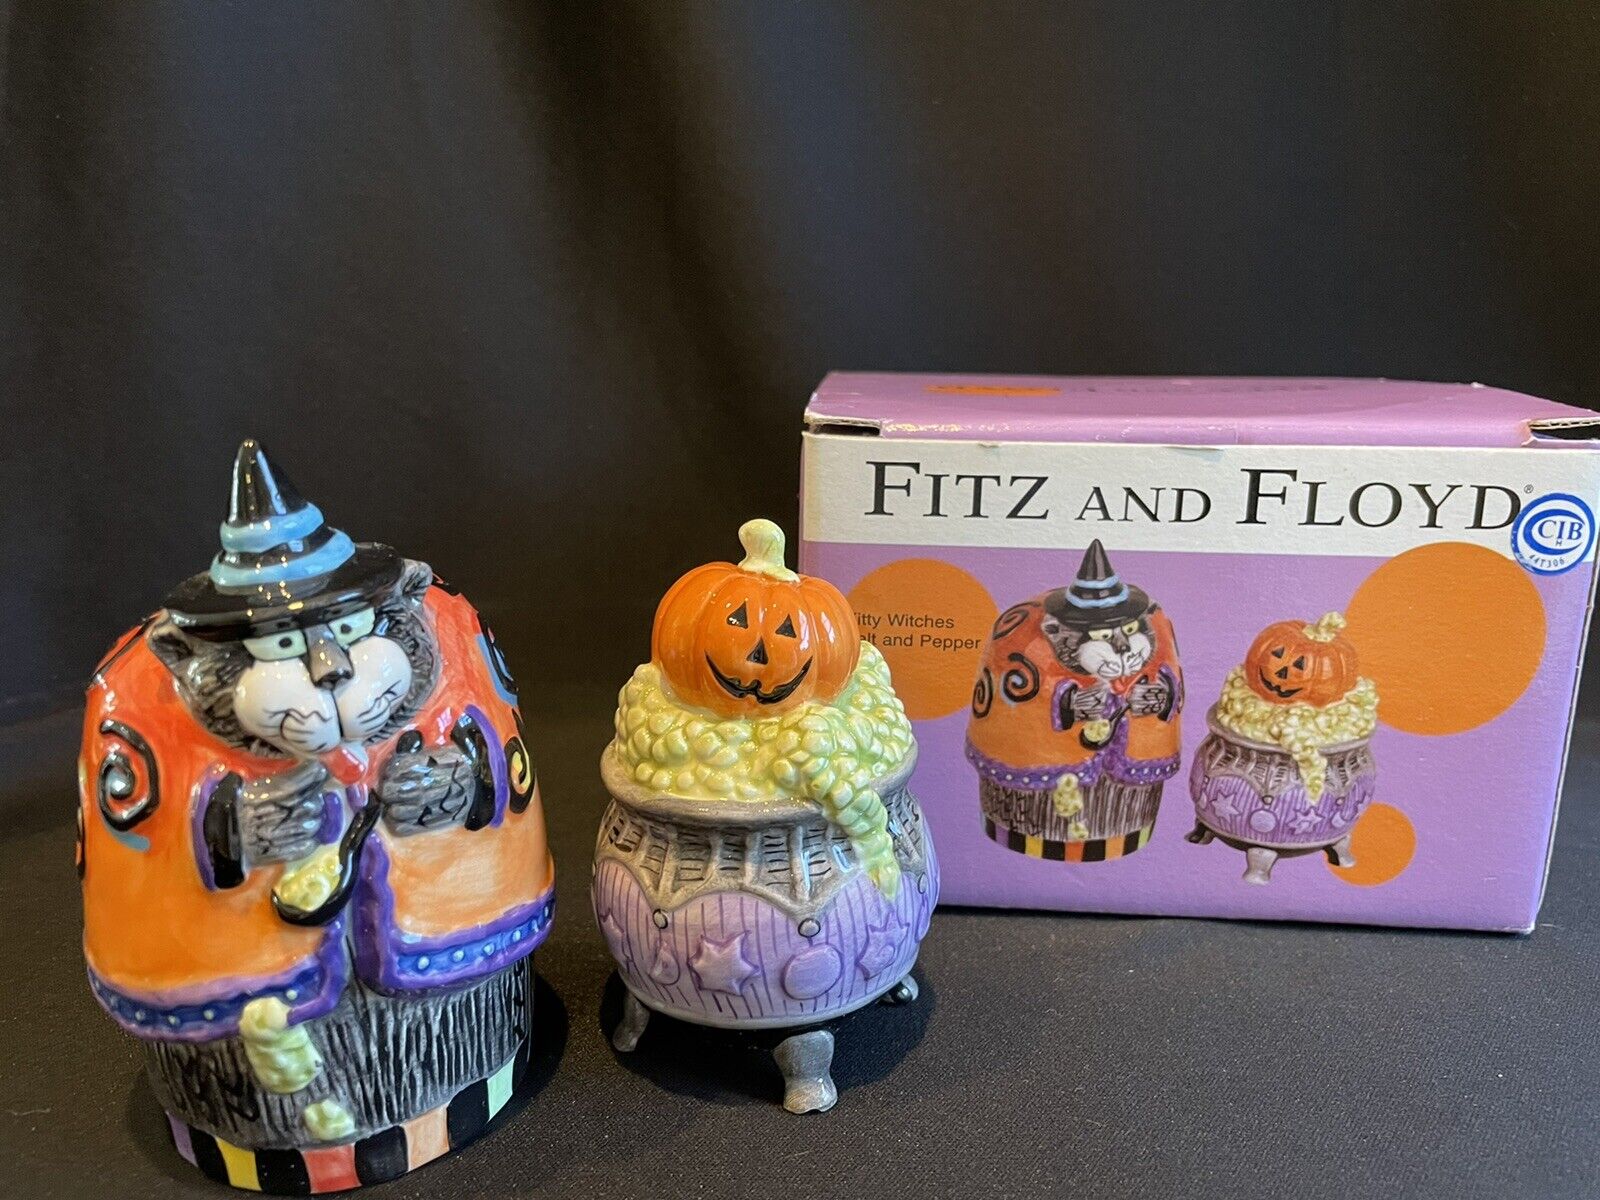 Fitz and Floyd Kitty Witches Halloween Salt & Pepper Shaker Set